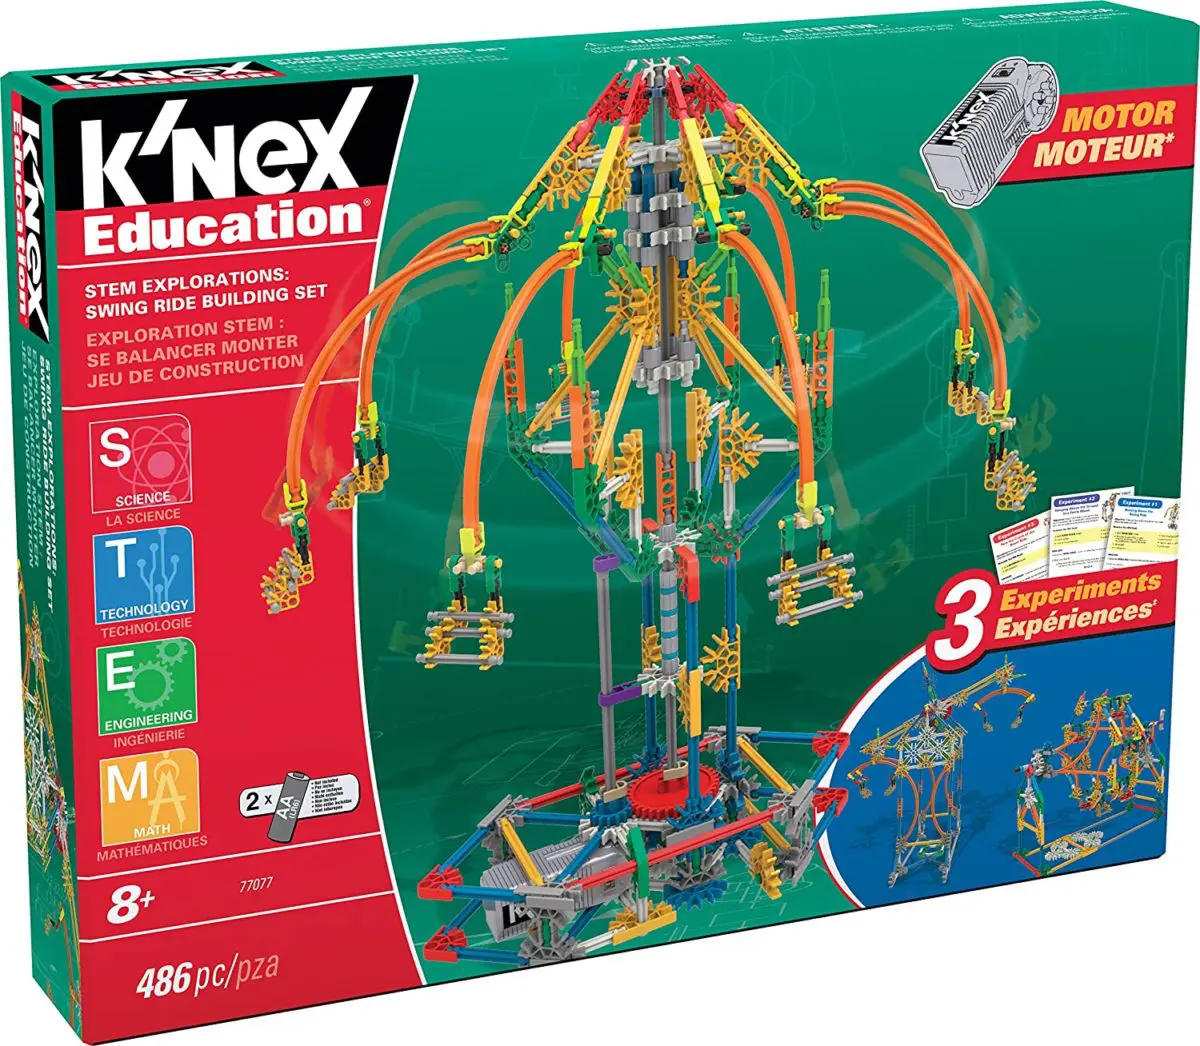 K’NEX Education STEM Explorations Swing Ride Building Set - Top Toys and Gifts for Ten Year Old Boys 1